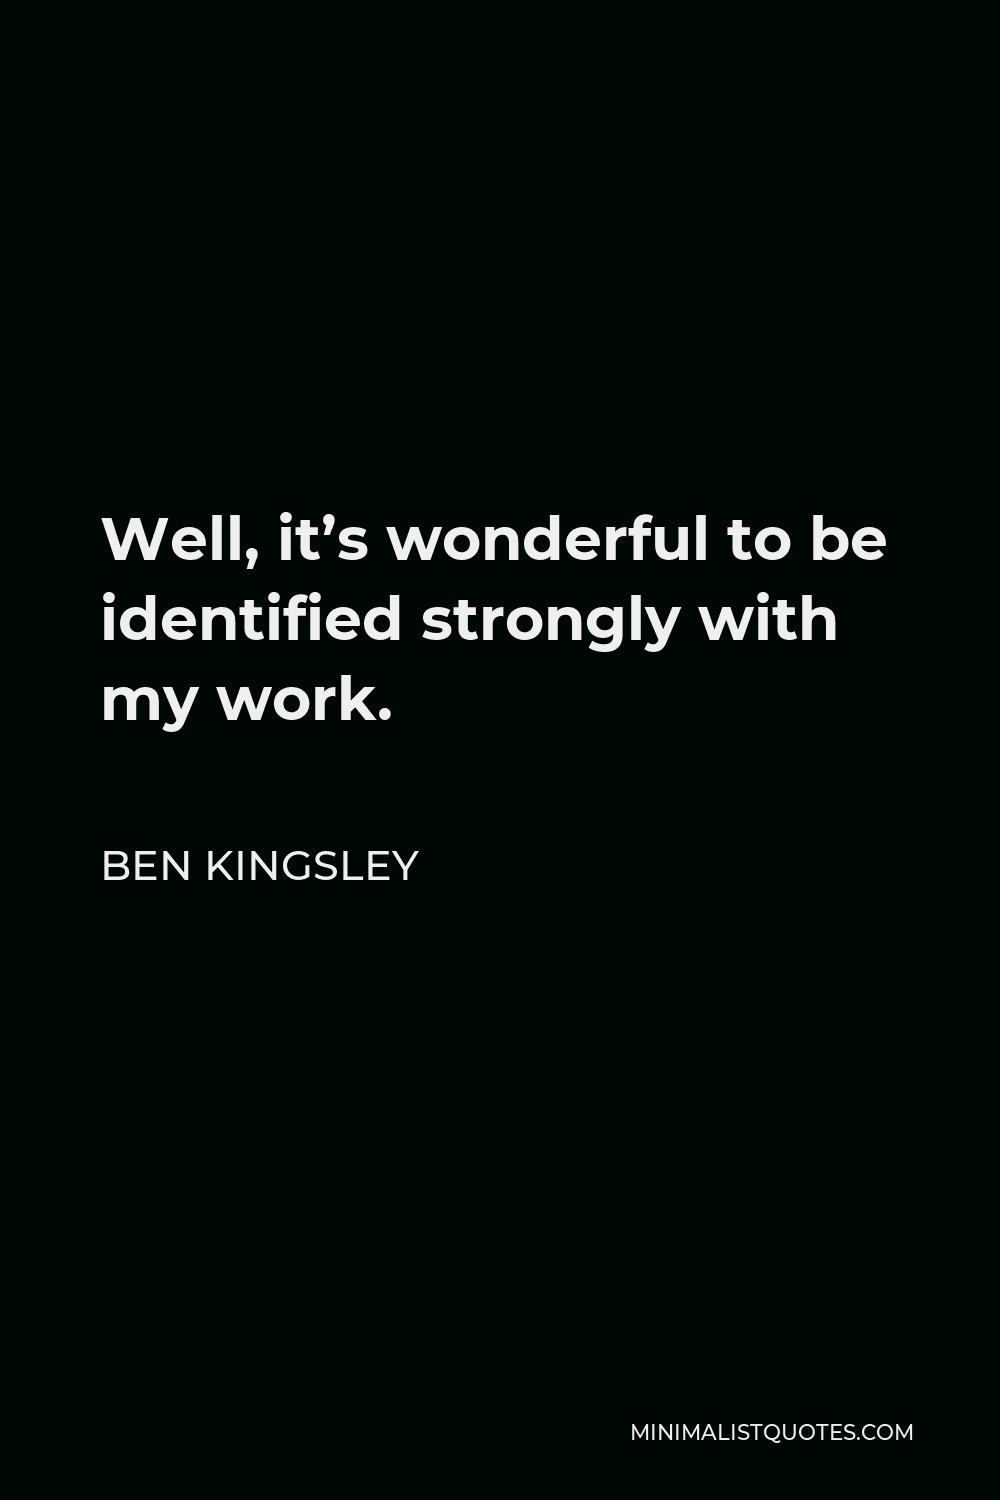 Ben Kingsley Quote - Well, it’s wonderful to be identified strongly with my work.